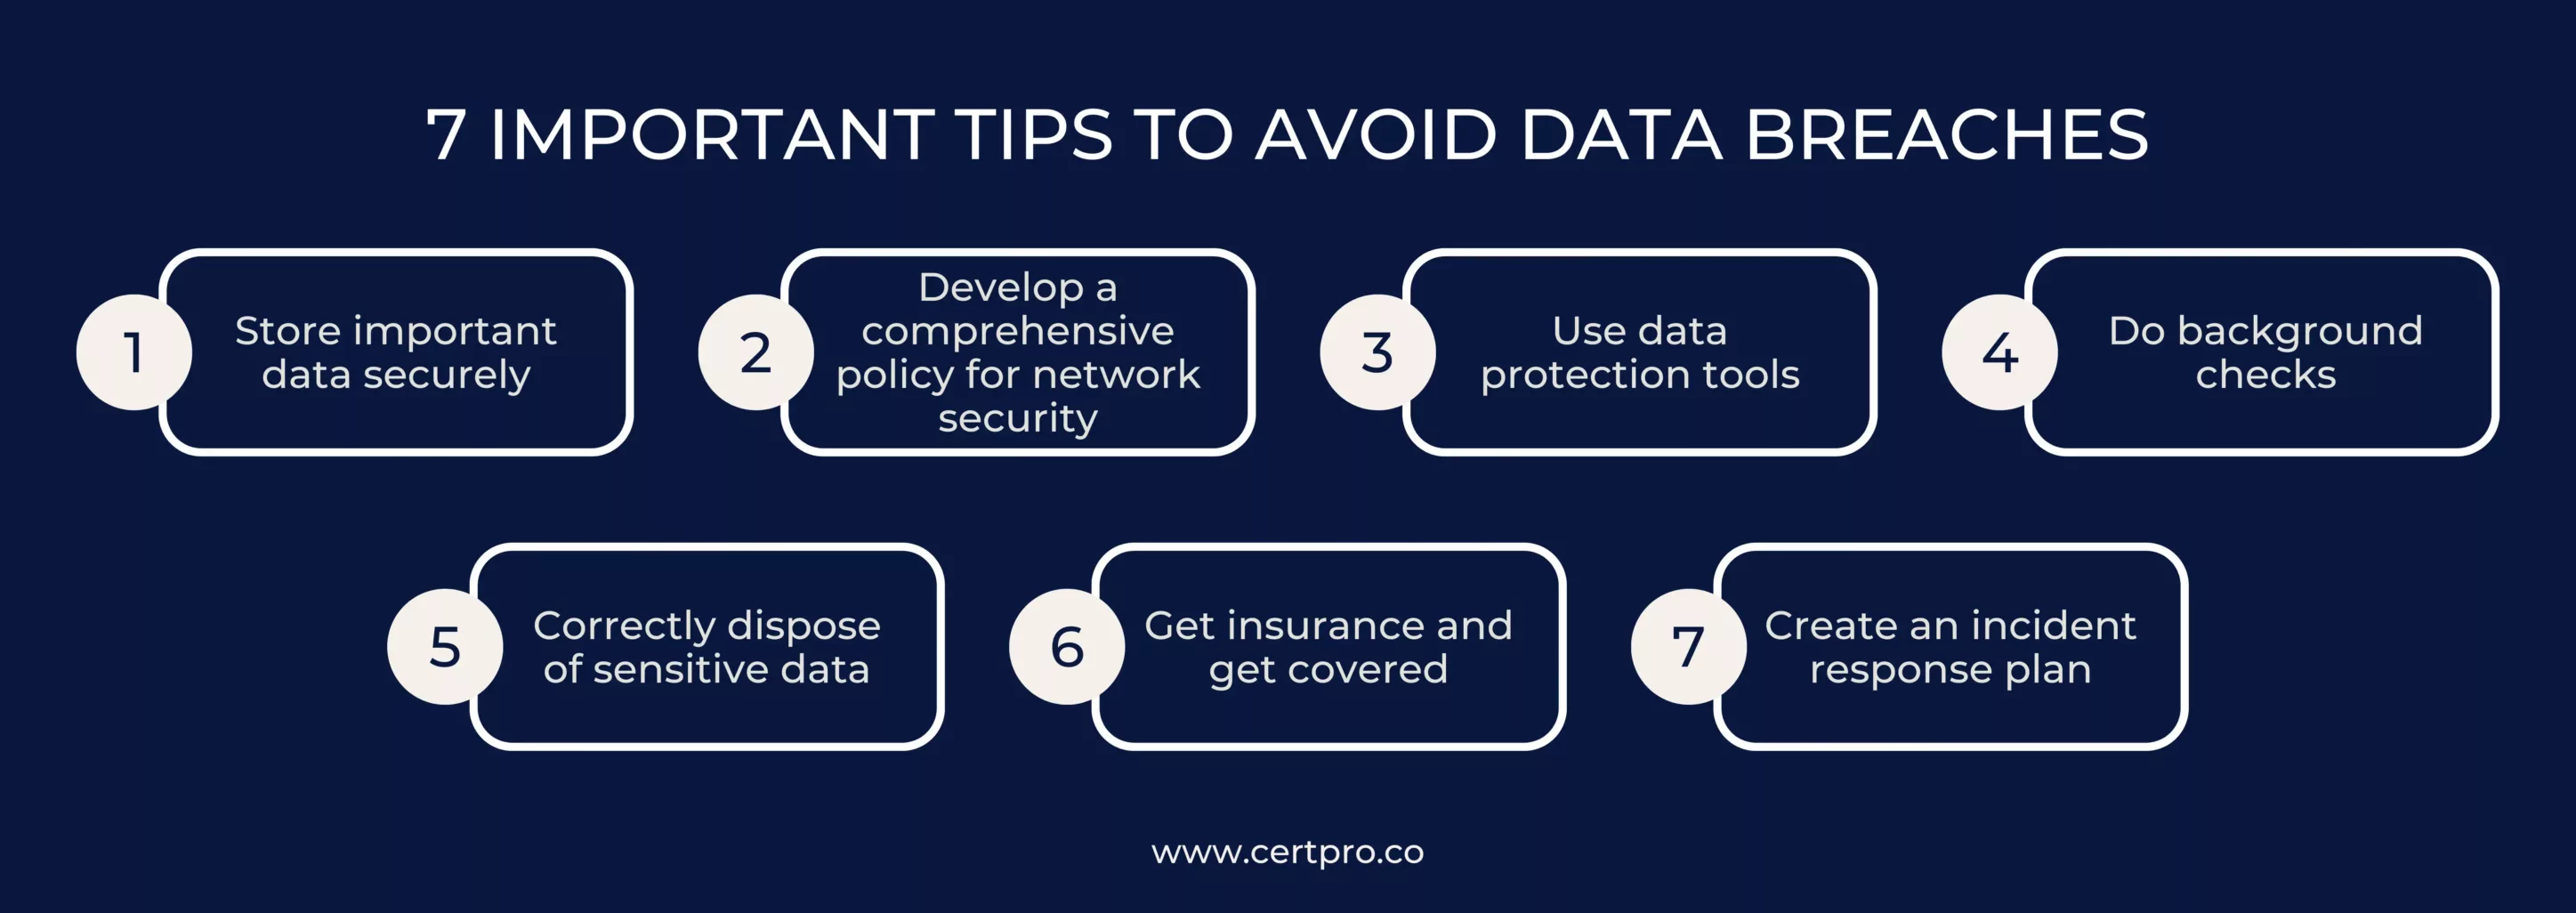 7 IMPORTANT TIPS TO AVOID DATA BREACHES